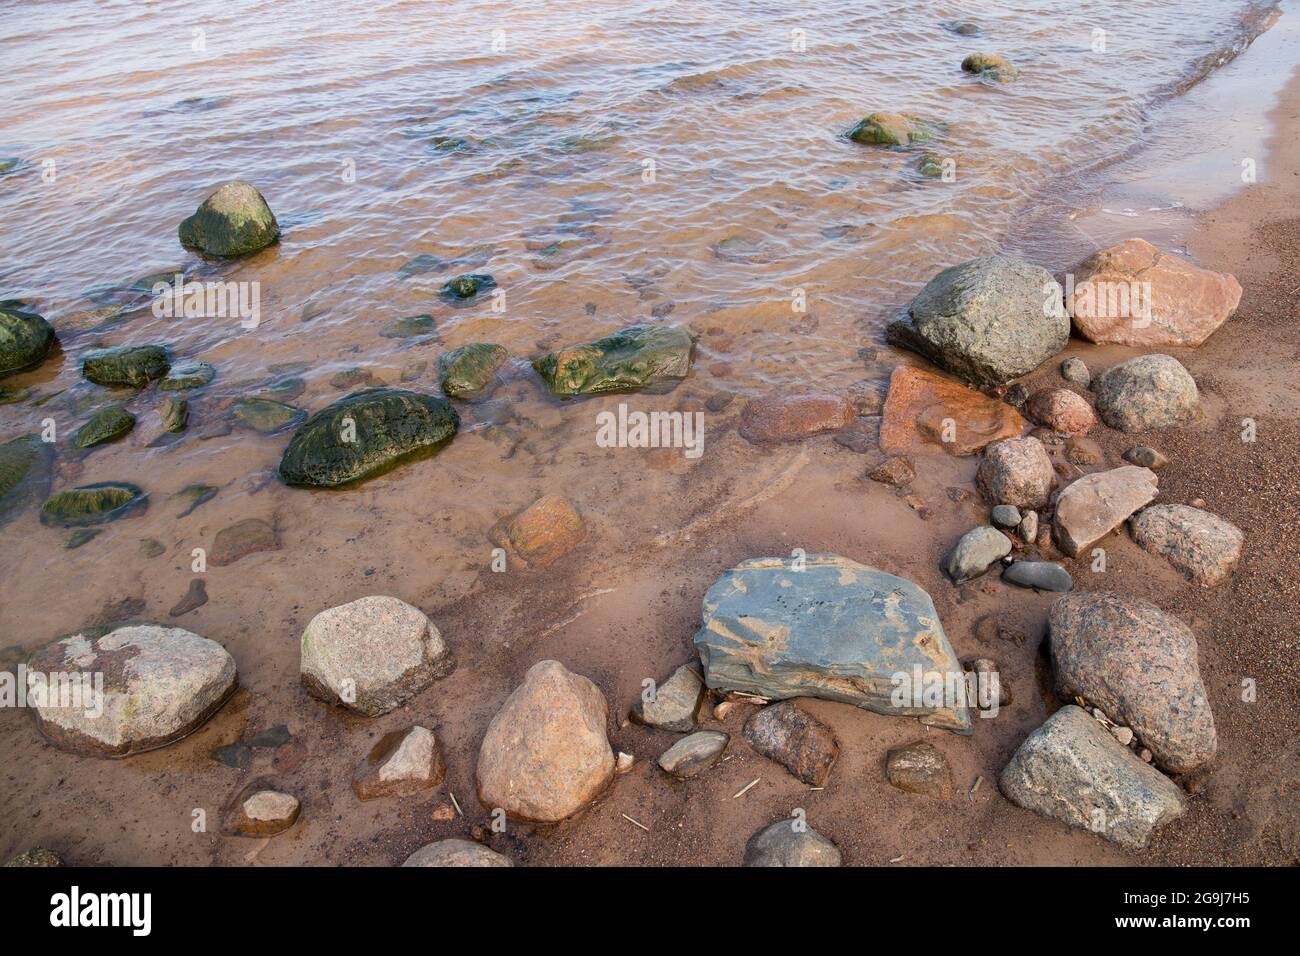 Wet stones with alga lay in coastal water of the Gulf of Finland, Russia Stock Photo